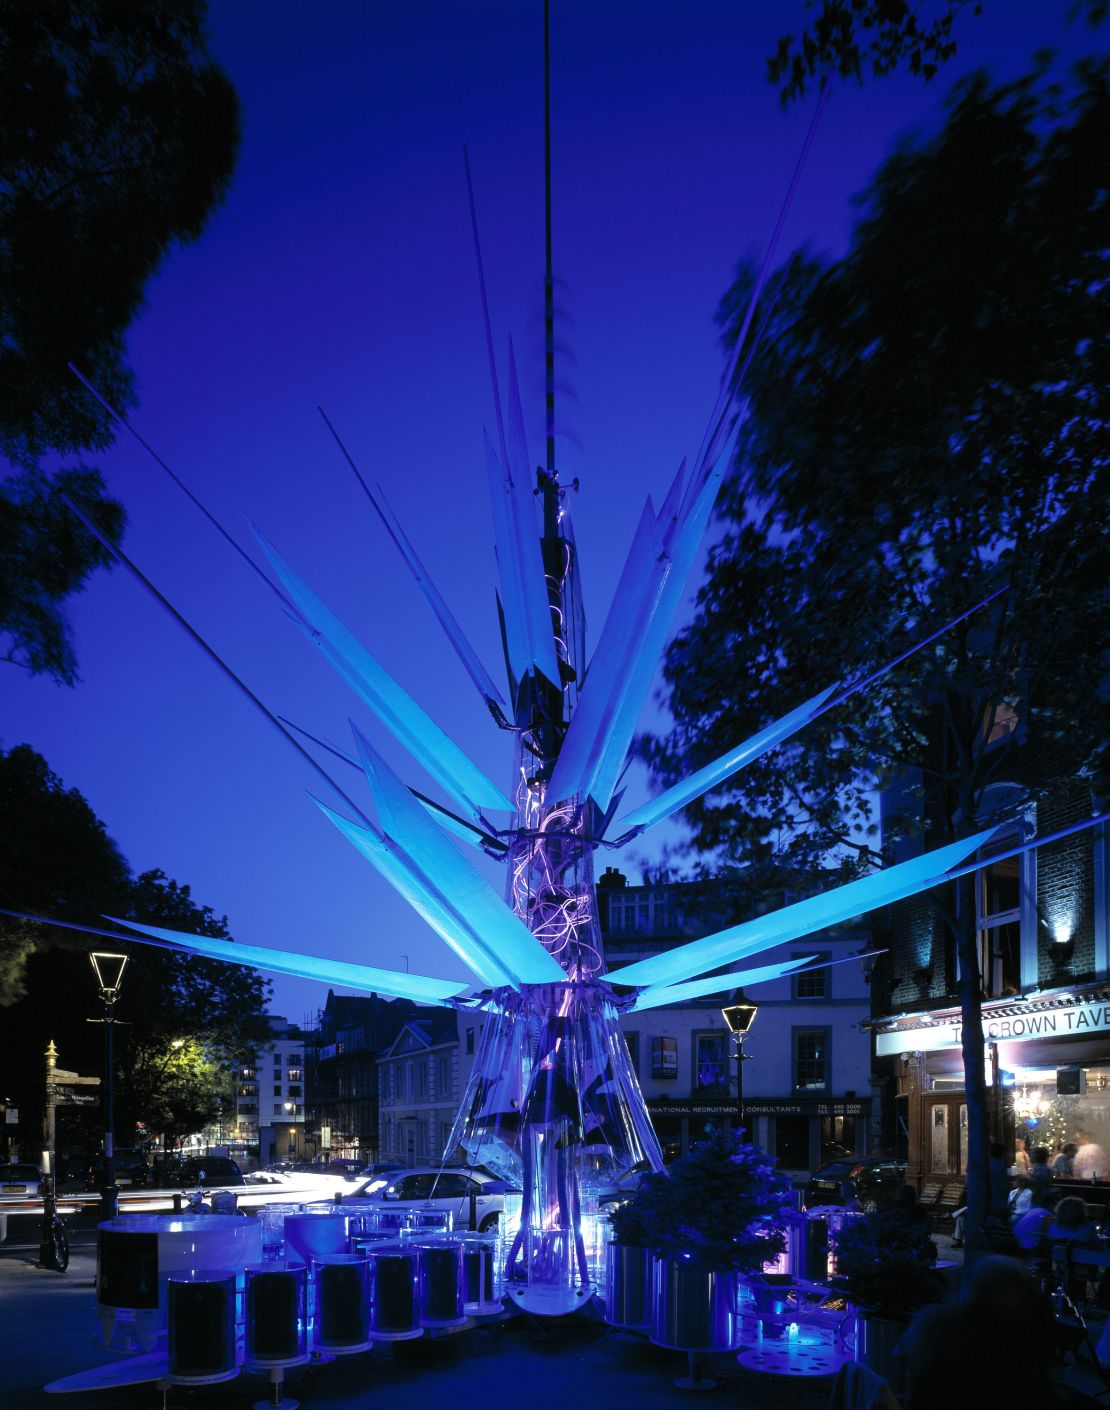 Urban Oasis, another eco-design by Chetwoods Architects, is meant to mimic a growing flower. It collects light, water and wind as energy and serves as a light sculpture at night.